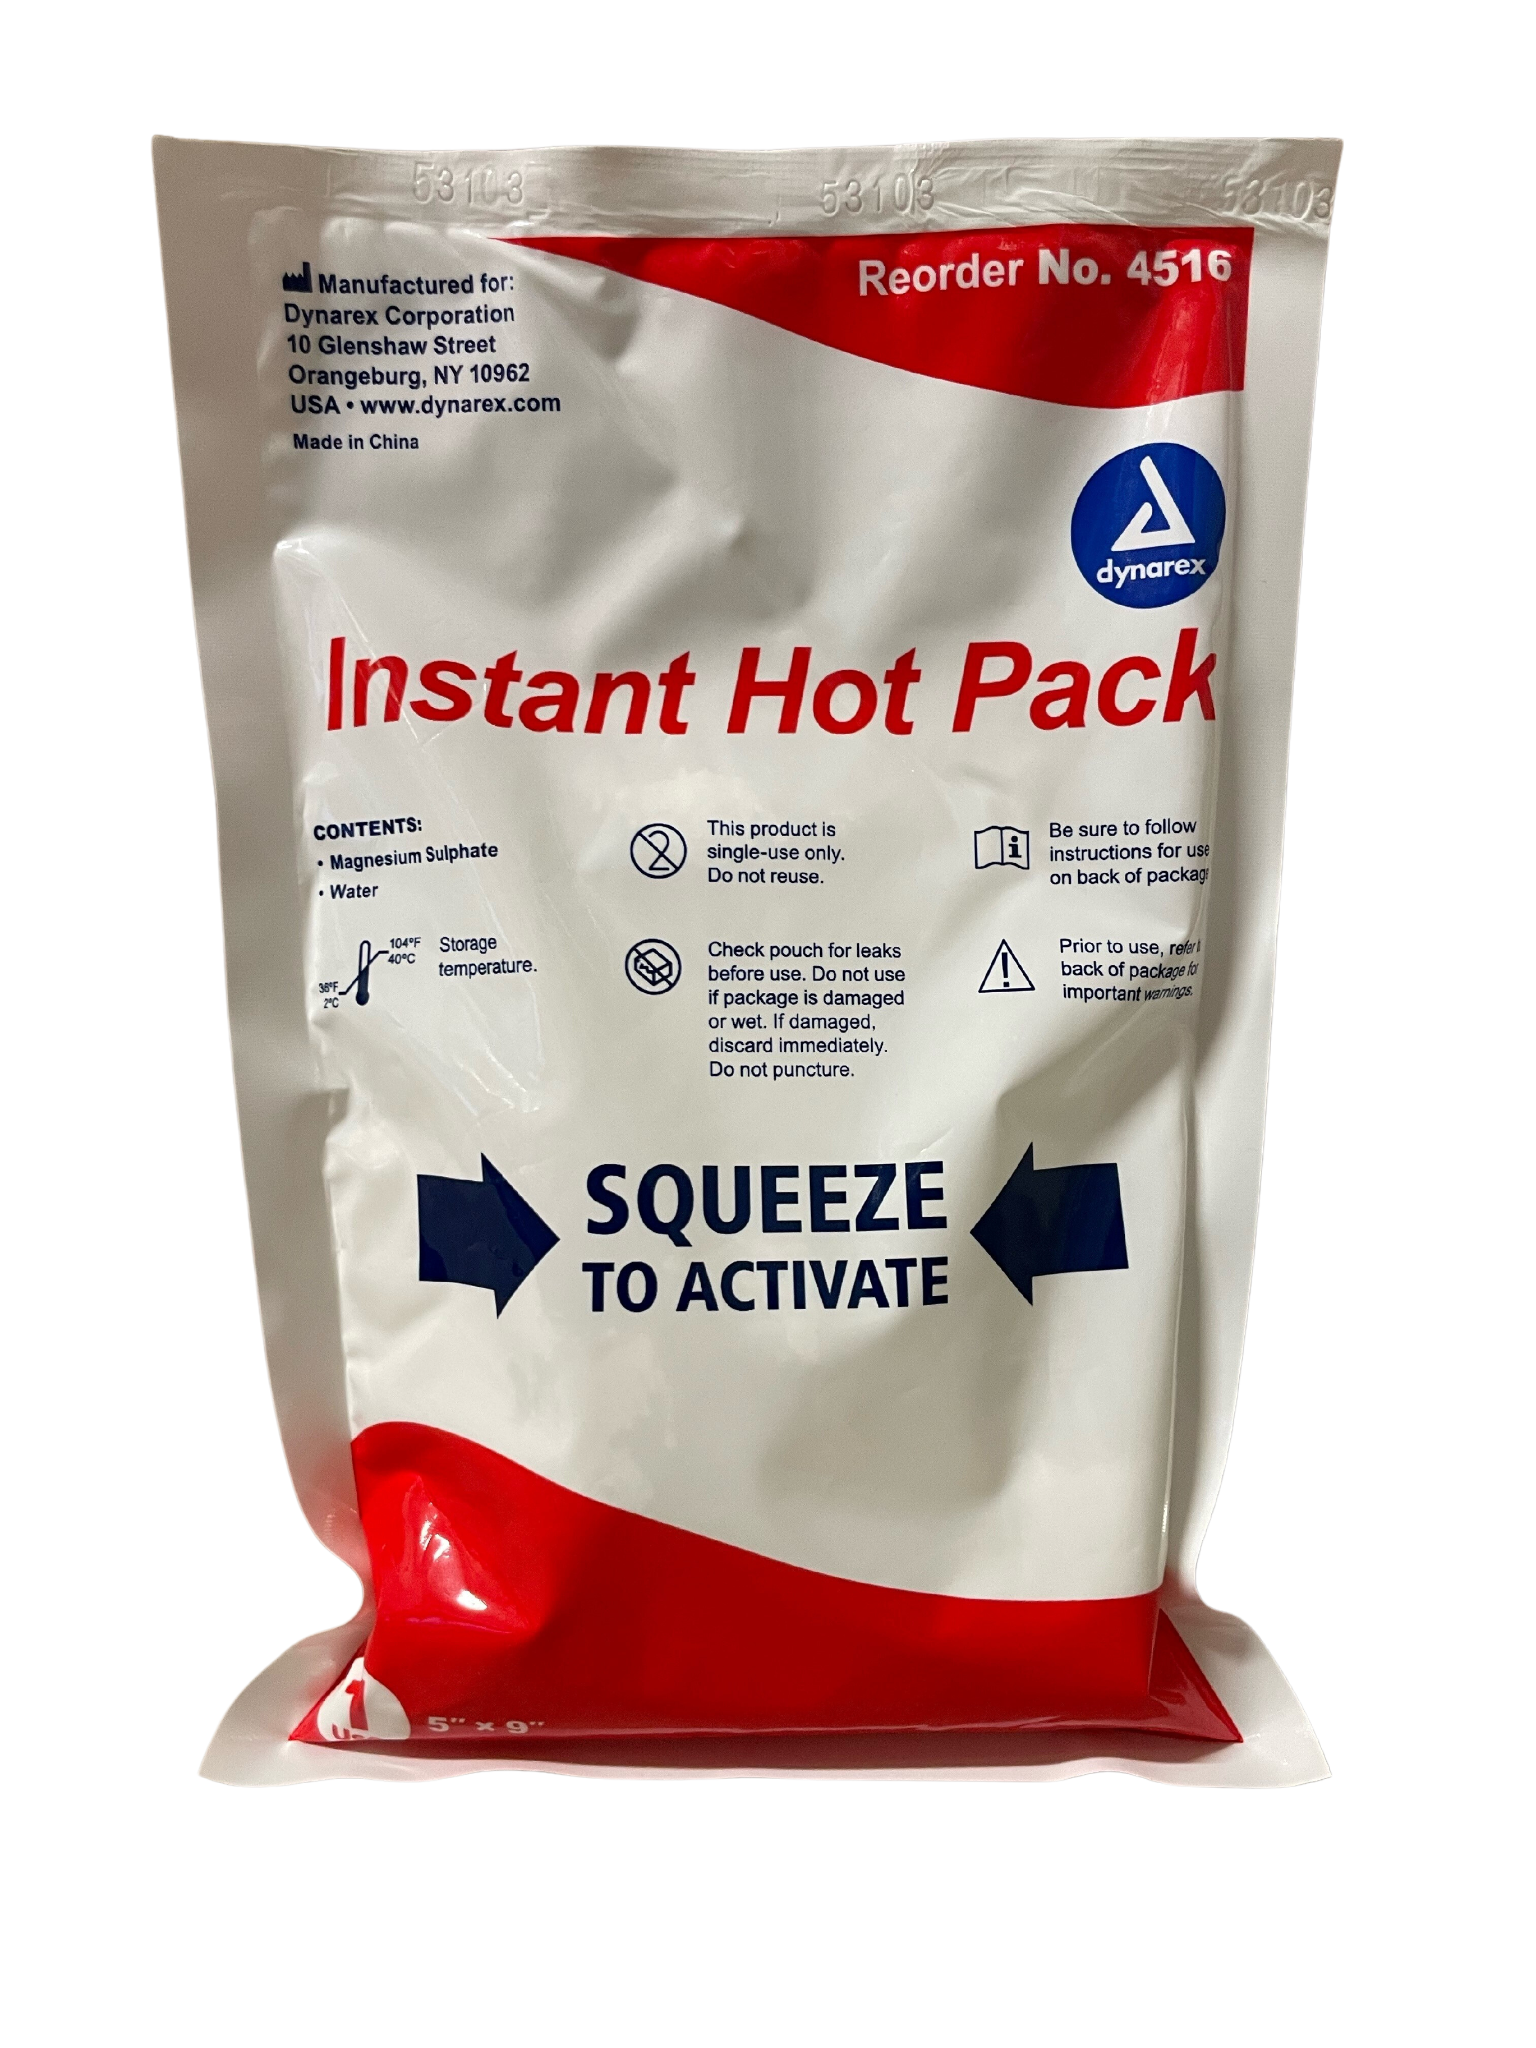 This Instant Hot Pack is for Use Whenever Hot Therapy is Needed!